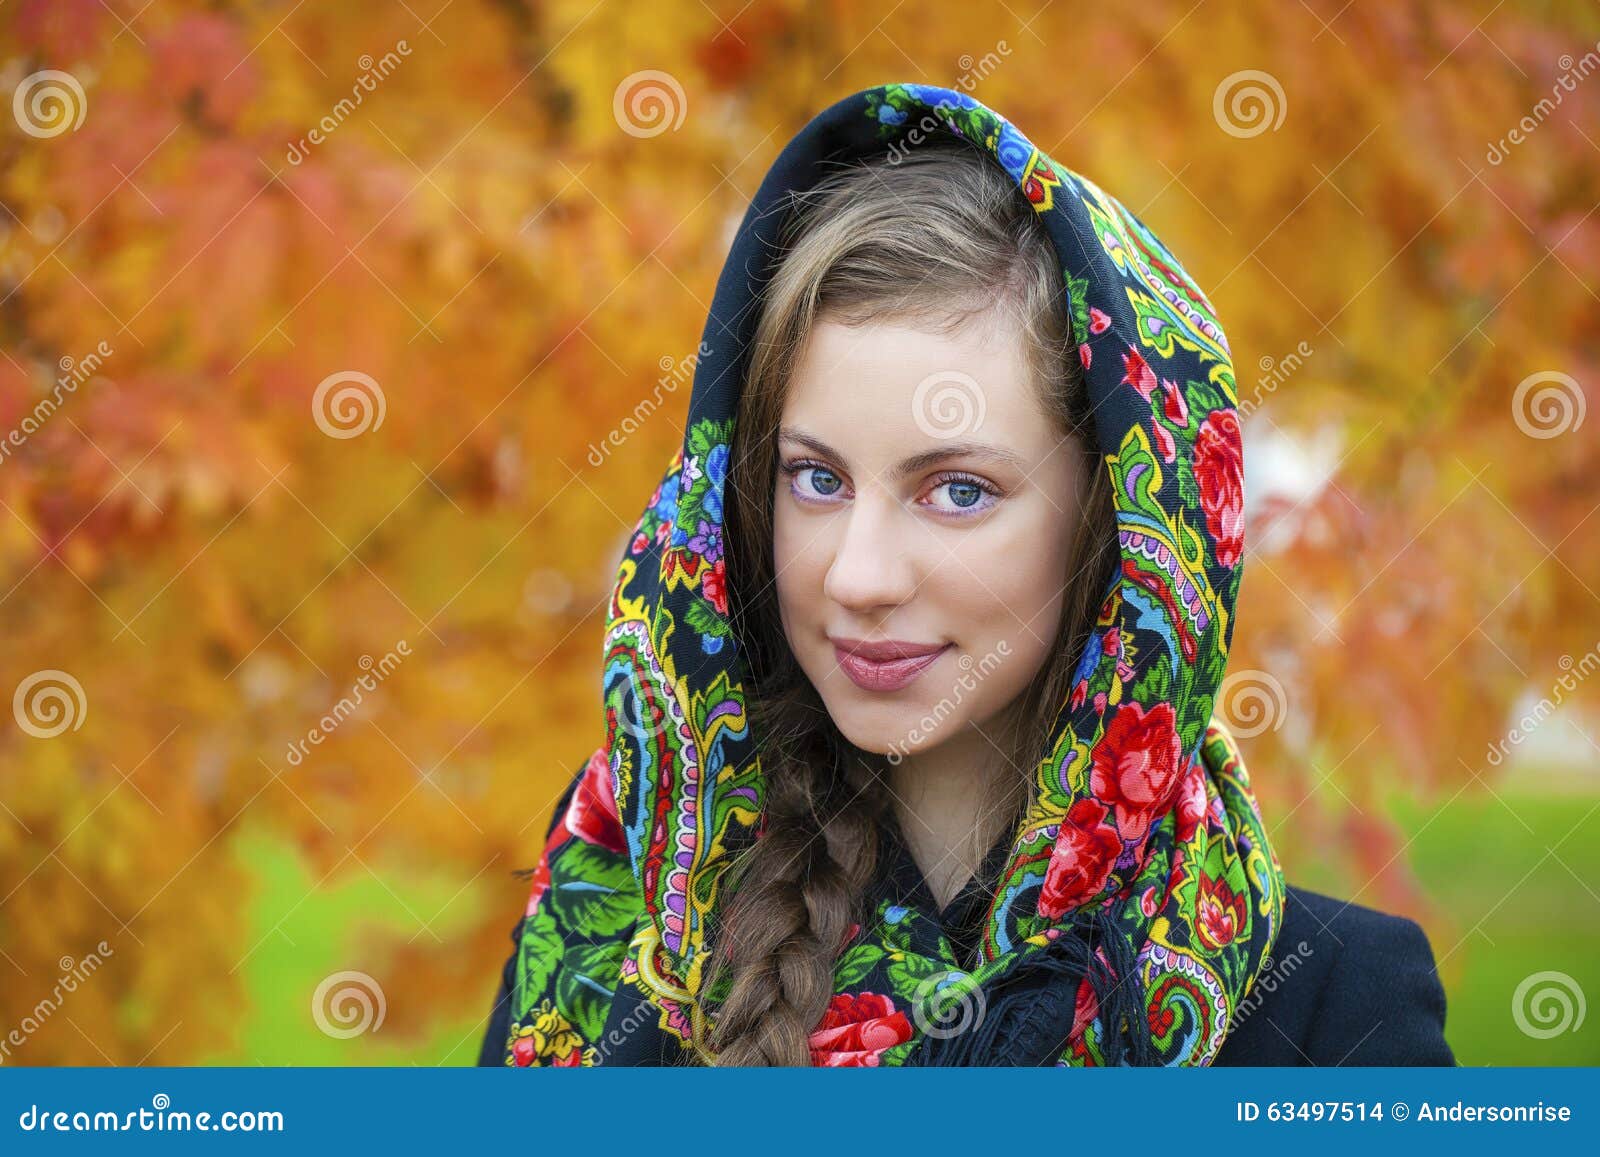 young italians in coat and knit a scarf on her head